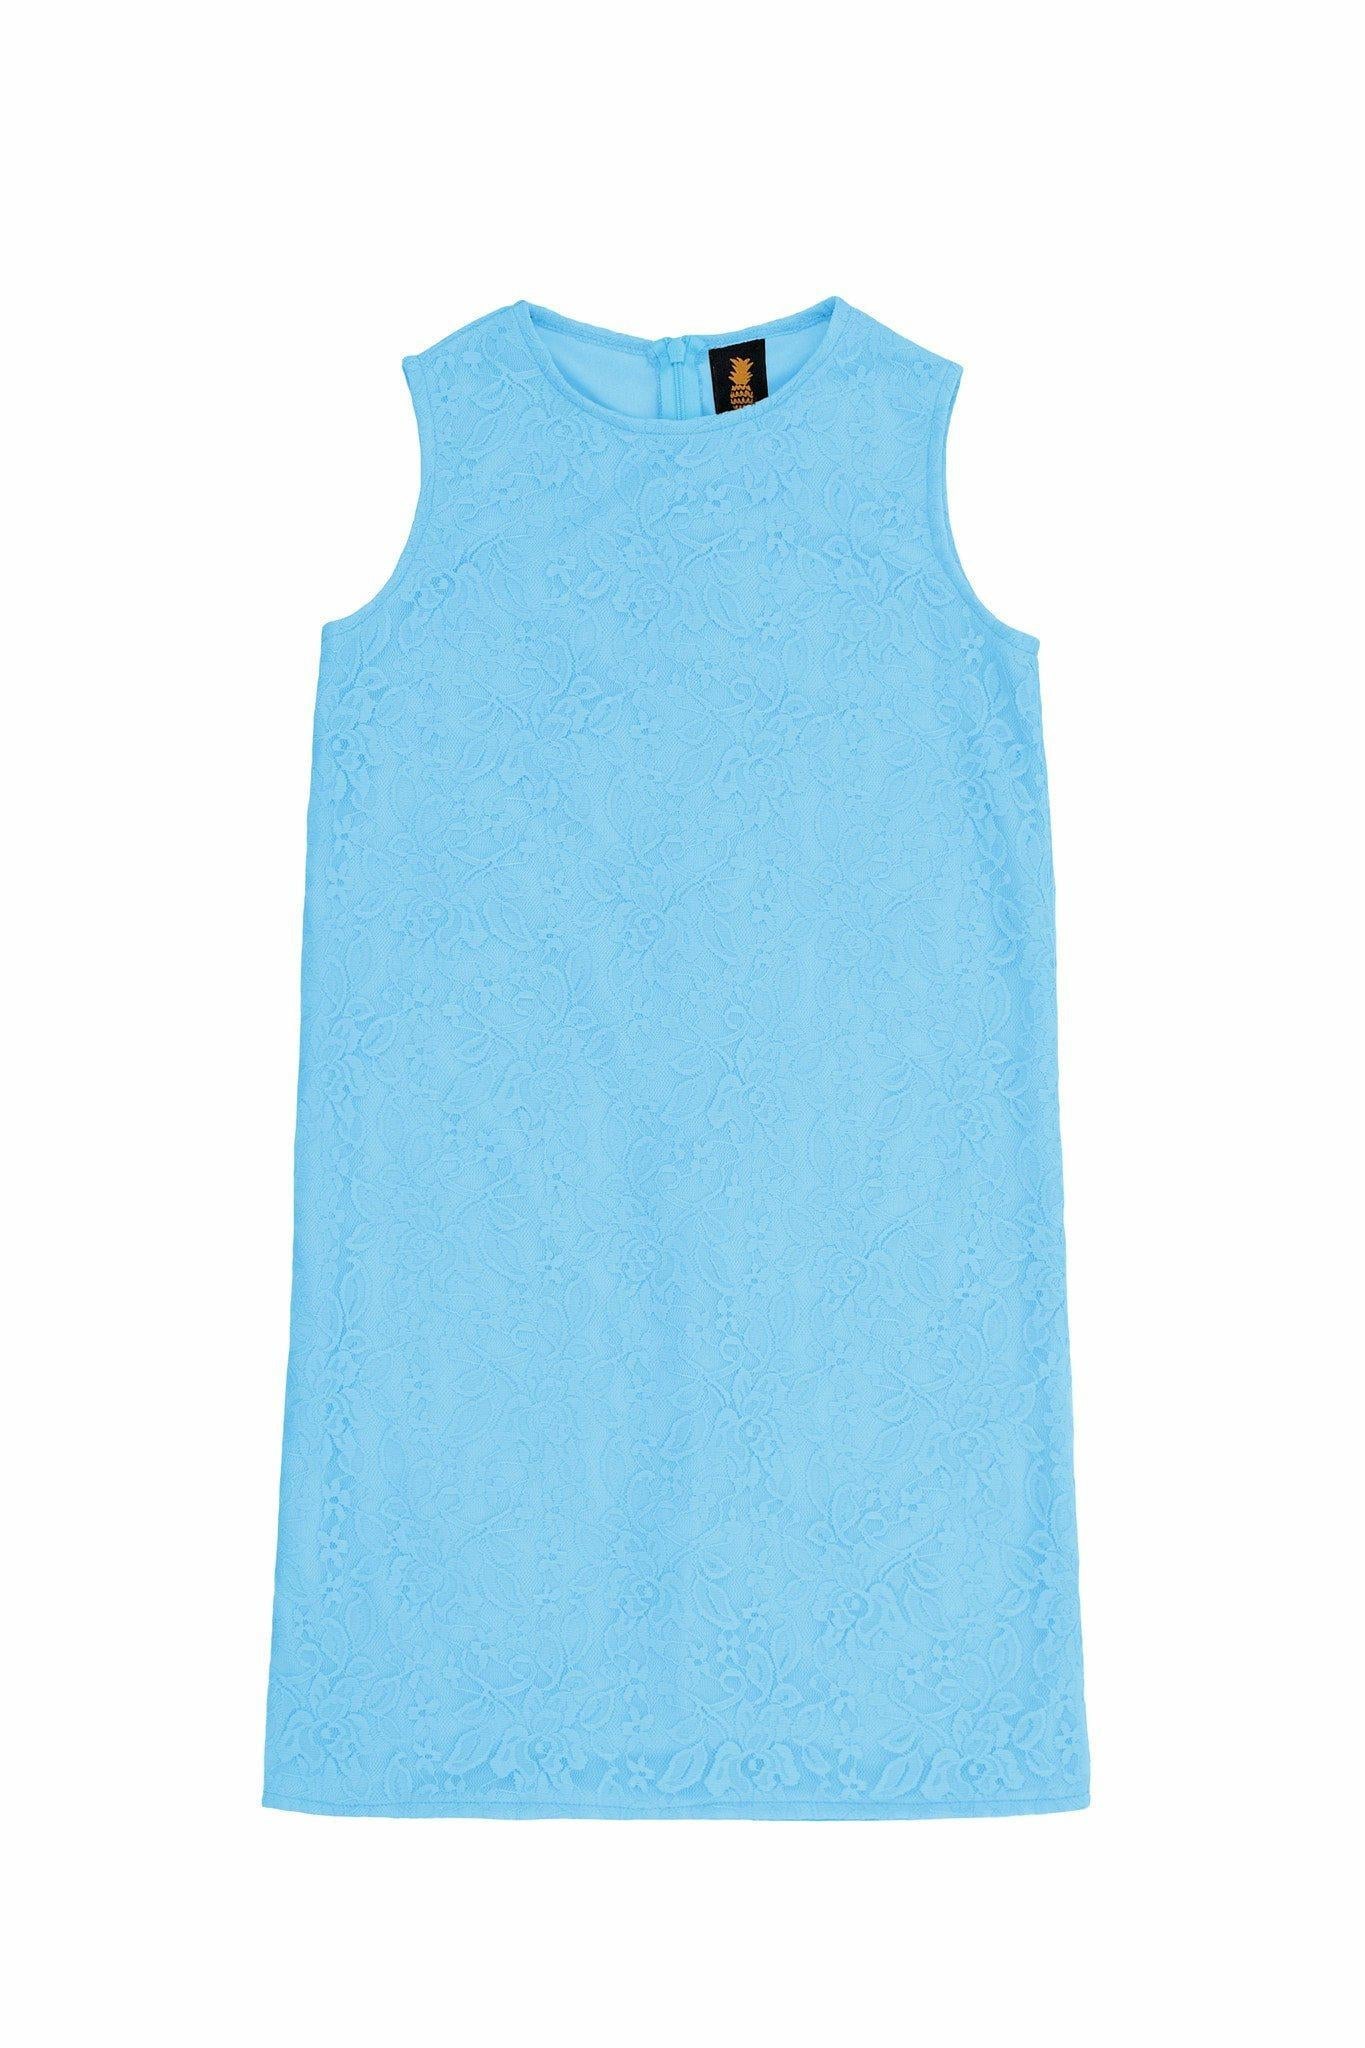 Baby Blue Stretchy Lace Sleeveless Summer Fancy Shift Dress - Girls - Pineapple Clothing